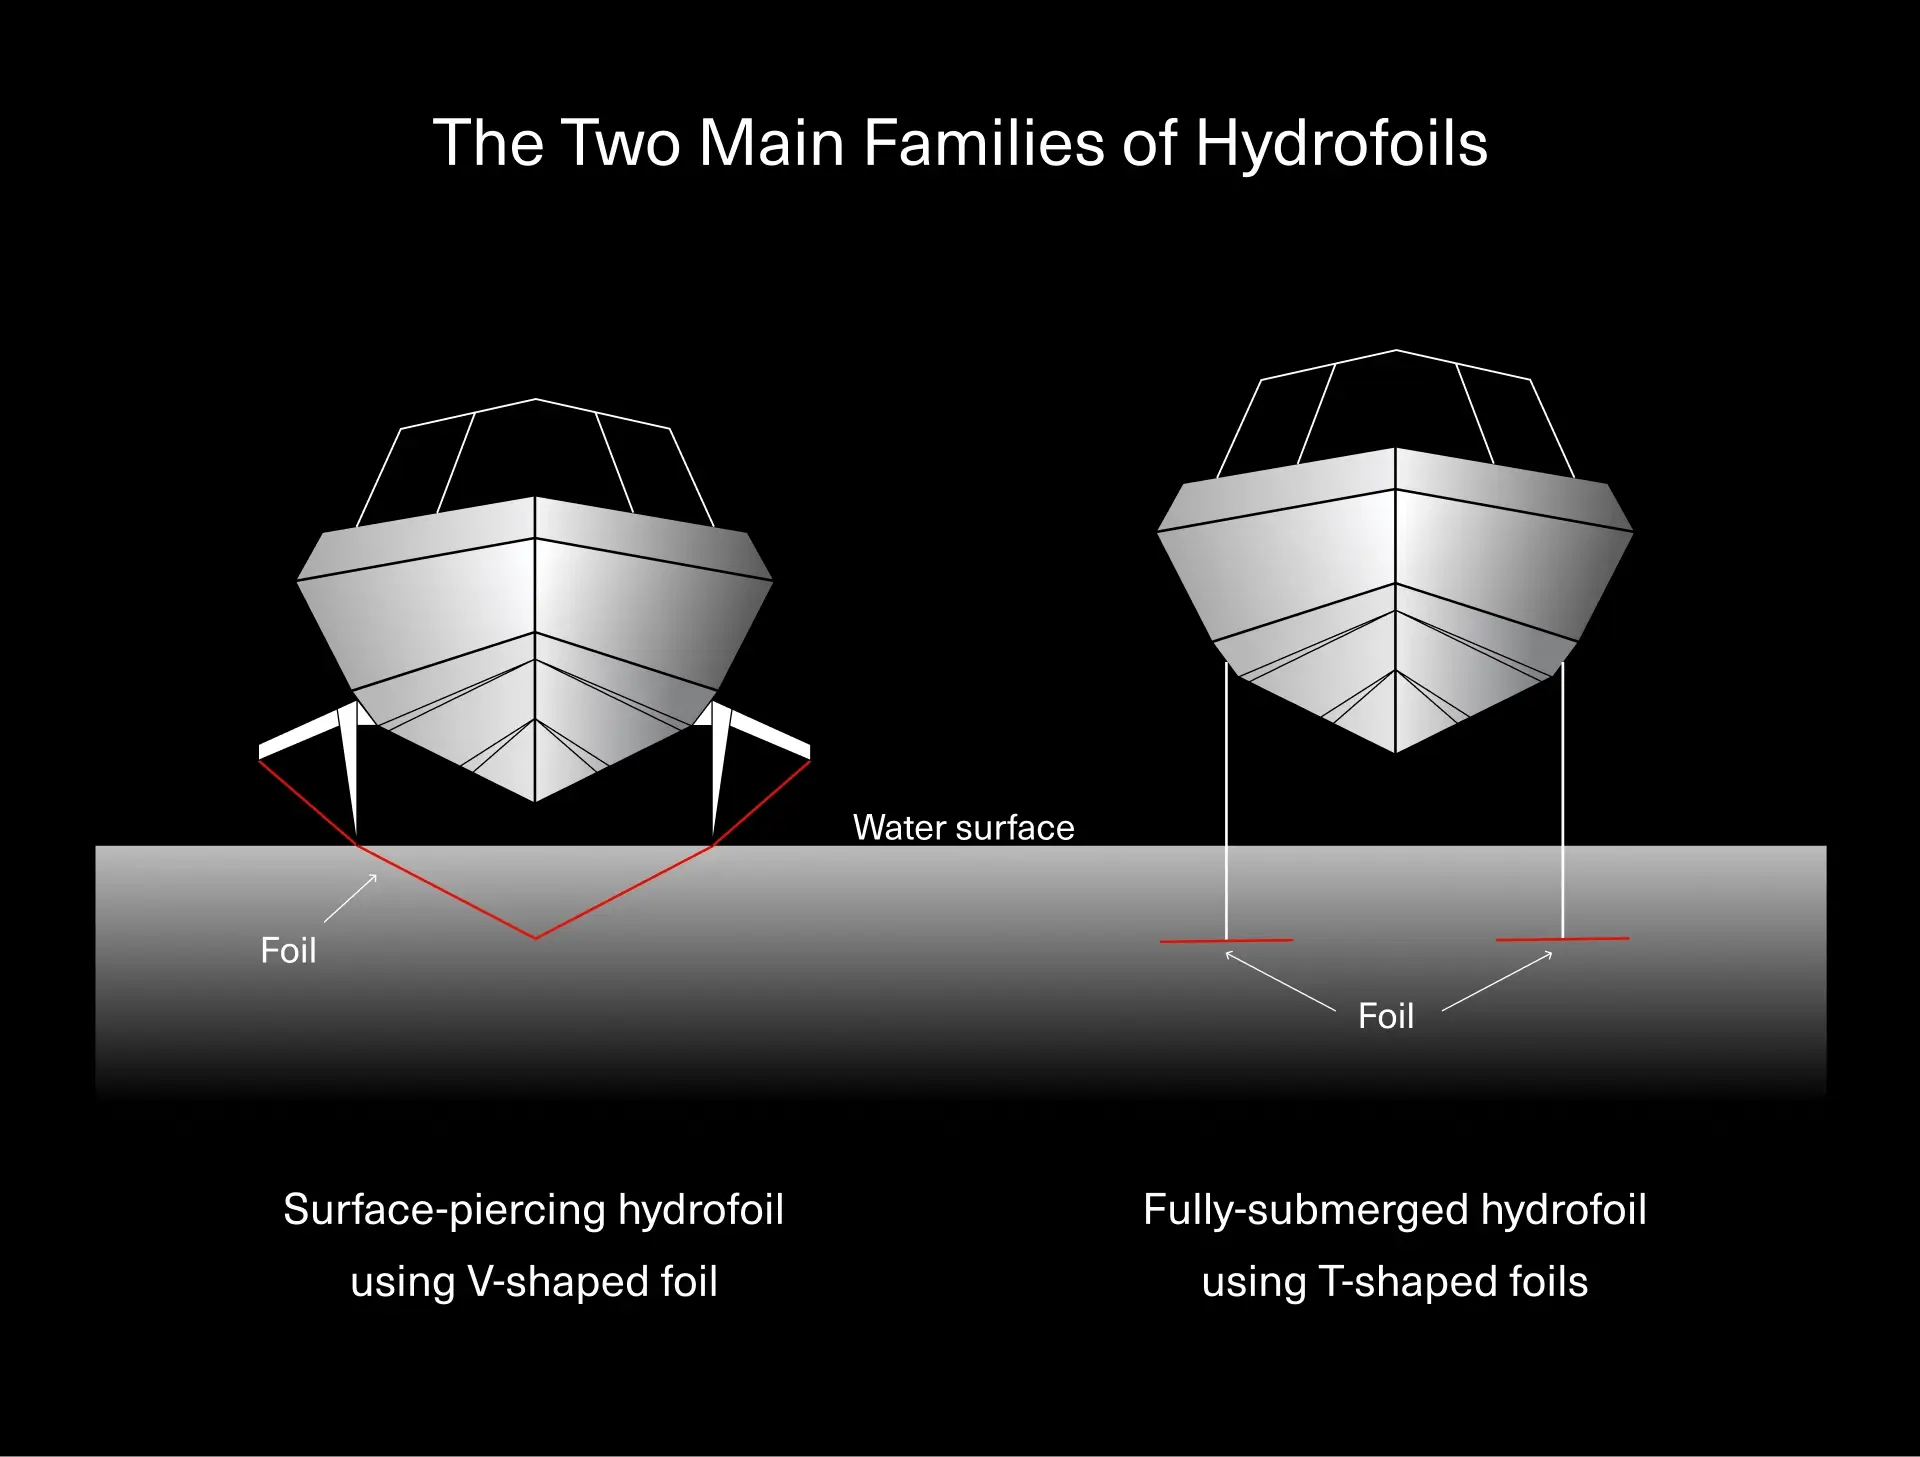 Two main falimies of hydrofoils